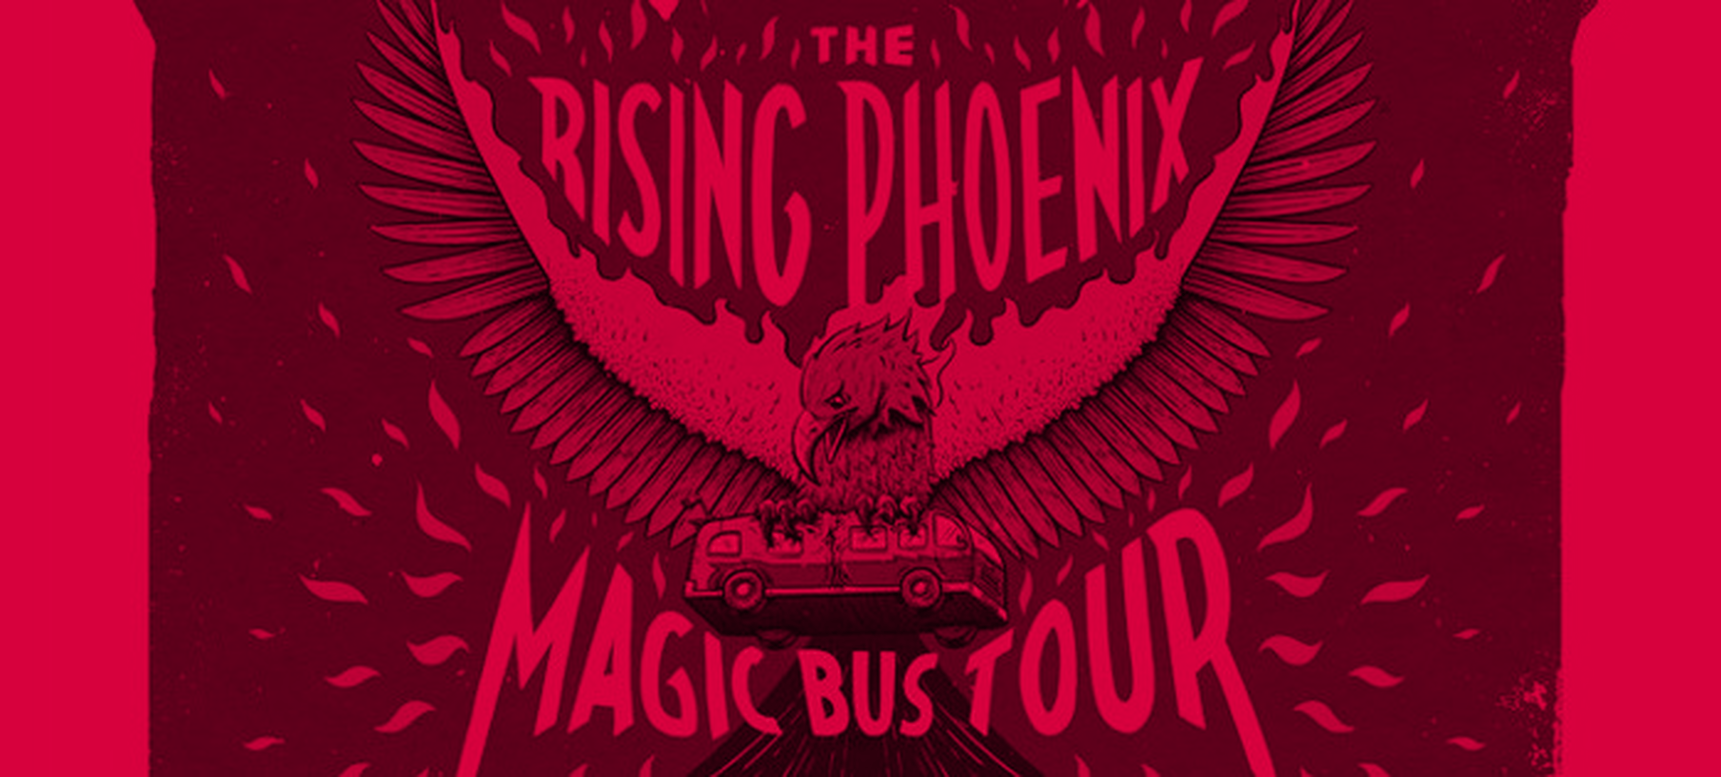 Phoenix Mixed with Red Bull Logo - The Rising Phoenix Magic Bus Tour. Red Bull Studios Cape Town